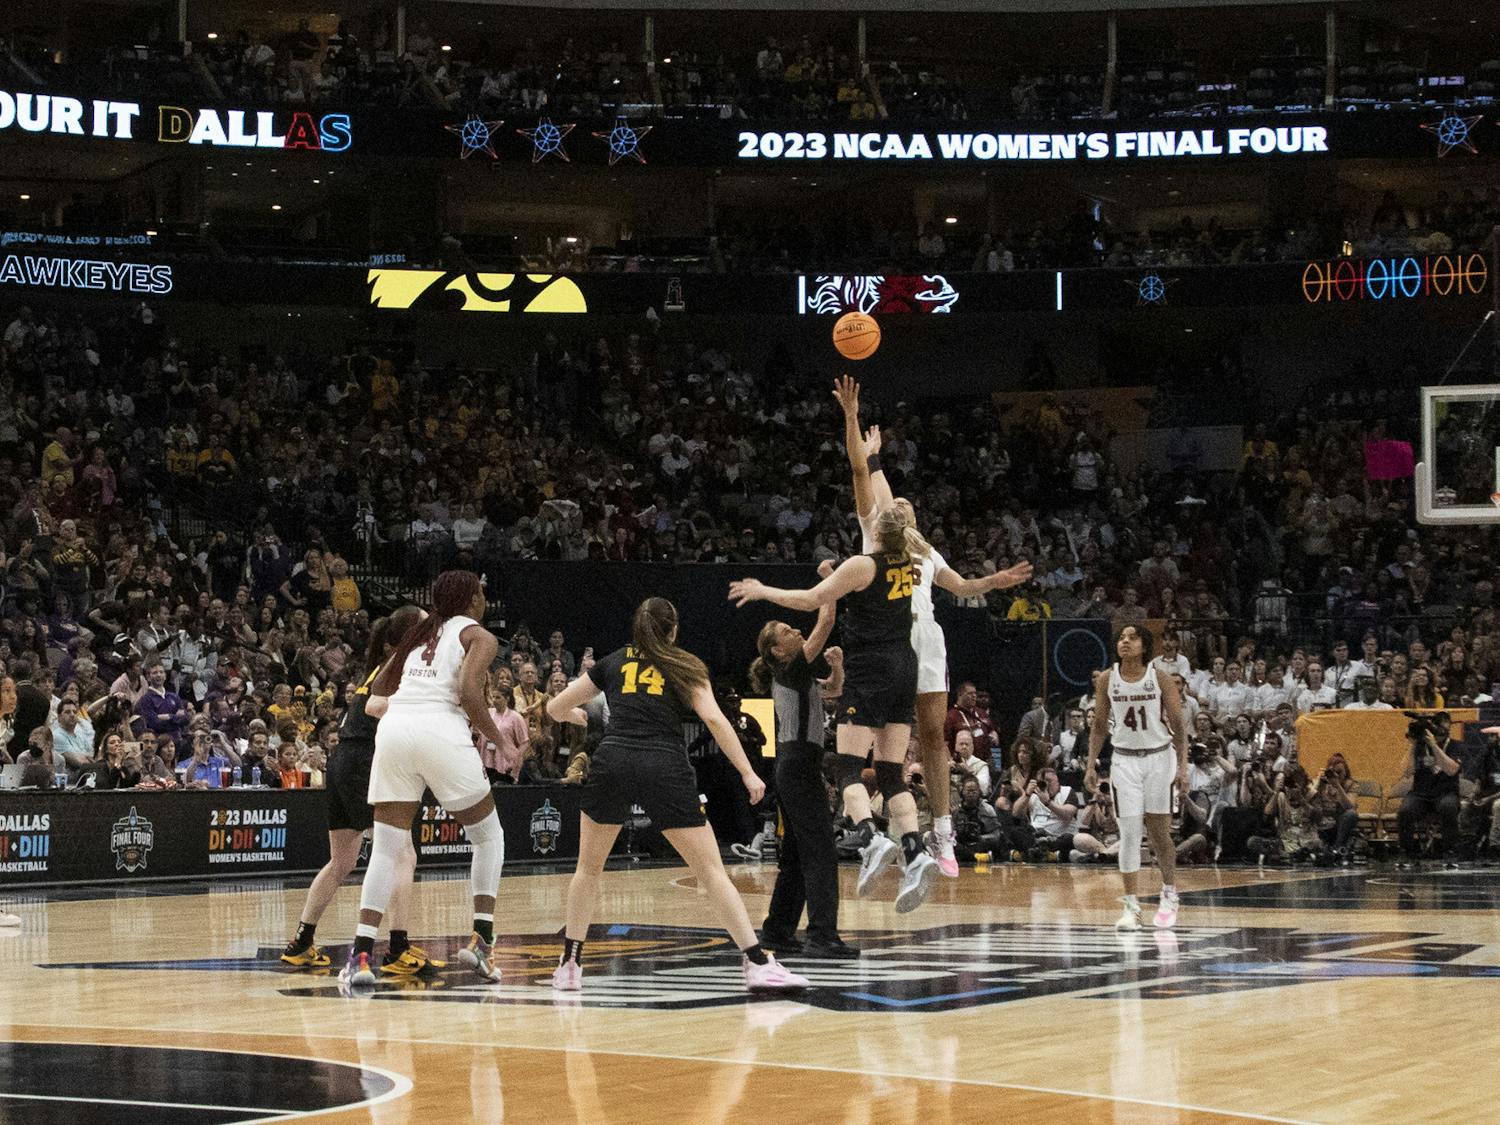 Senior forward Victaria Saxton wins the tip-off against the University of Iowa at the start of the Women’s Final Four match on March 31, 2023. The Gamecocks were defeated by the Hawkeyes 77-73.&nbsp;